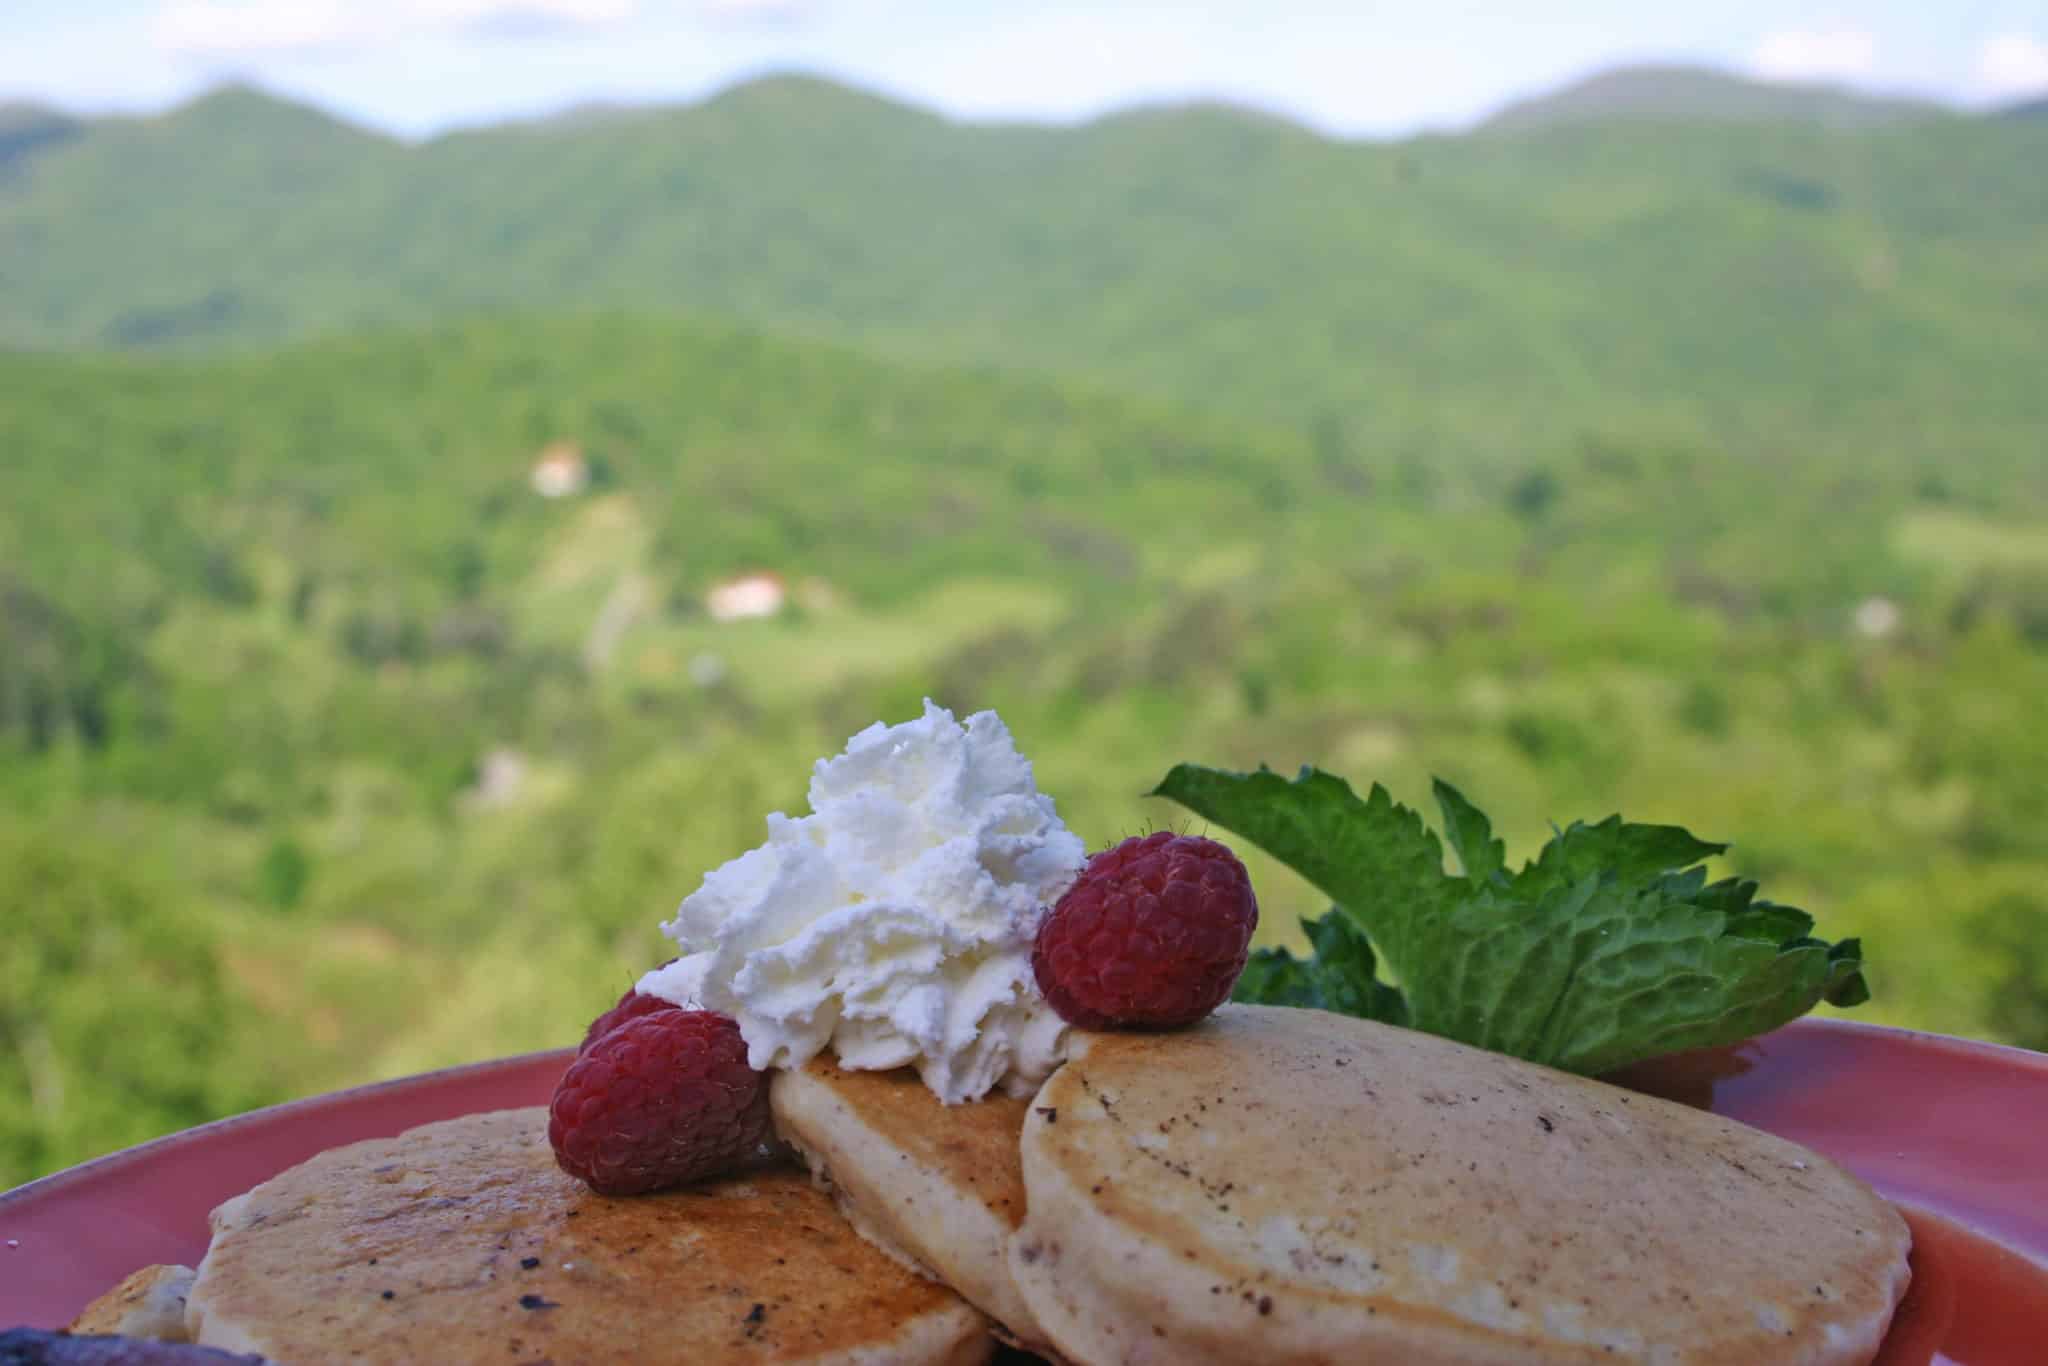 Three pancakes overlapping on red plate. Topped with two raspberries and whipped cream. Green hills in background.